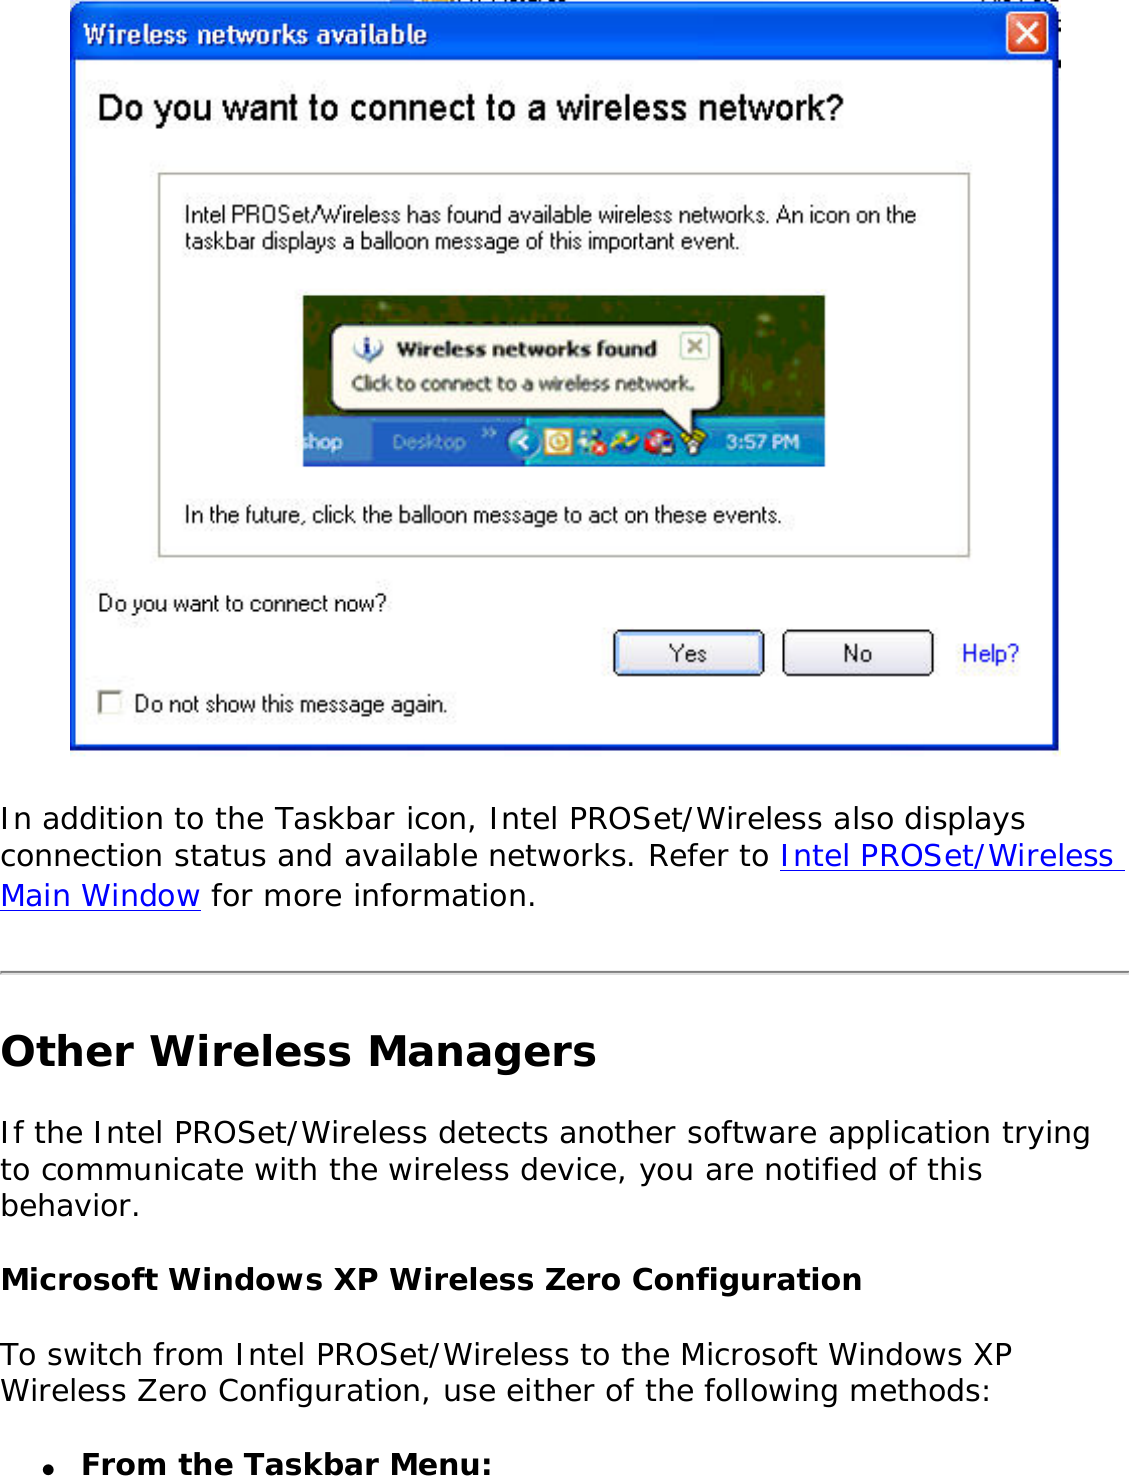  In addition to the Taskbar icon, Intel PROSet/Wireless also displays connection status and available networks. Refer to Intel PROSet/Wireless Main Window for more information. Other Wireless ManagersIf the Intel PROSet/Wireless detects another software application trying to communicate with the wireless device, you are notified of this behavior. Microsoft Windows XP Wireless Zero Configuration To switch from Intel PROSet/Wireless to the Microsoft Windows XP Wireless Zero Configuration, use either of the following methods: ●     From the Taskbar Menu: